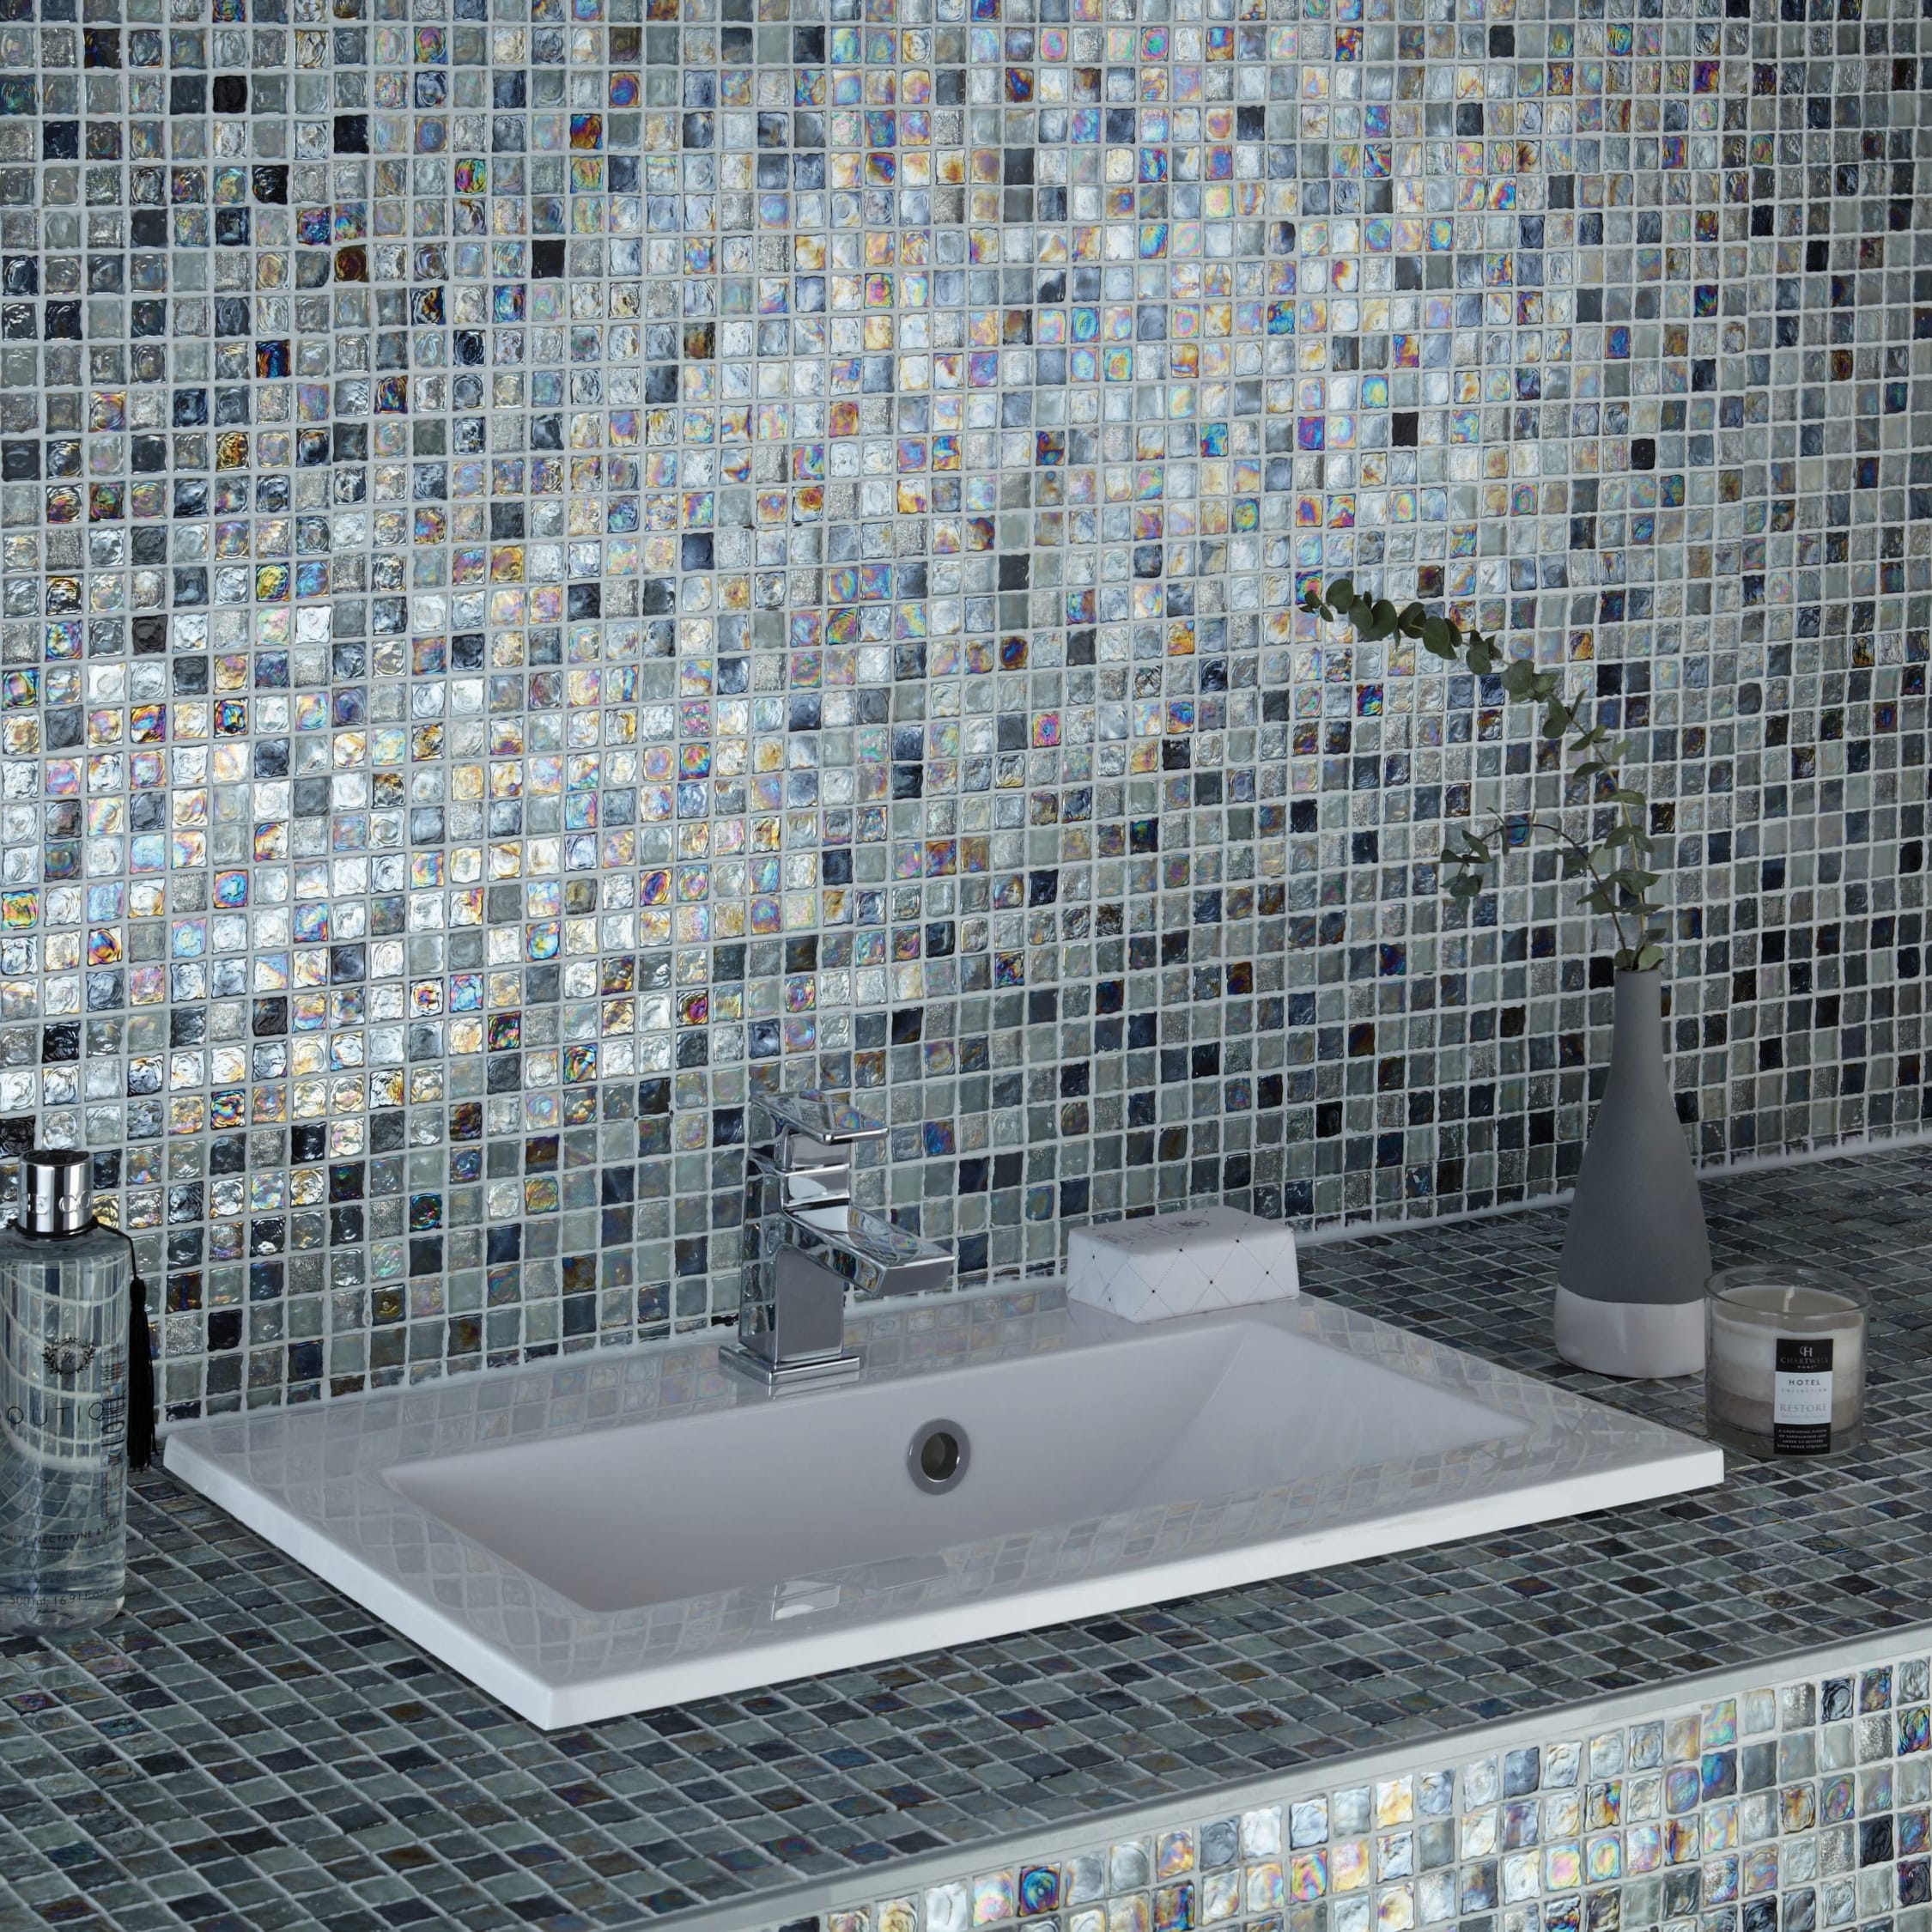 Wickes Shimmer Hammered Grey Glass Mosaic Tile - 300 x 300mm